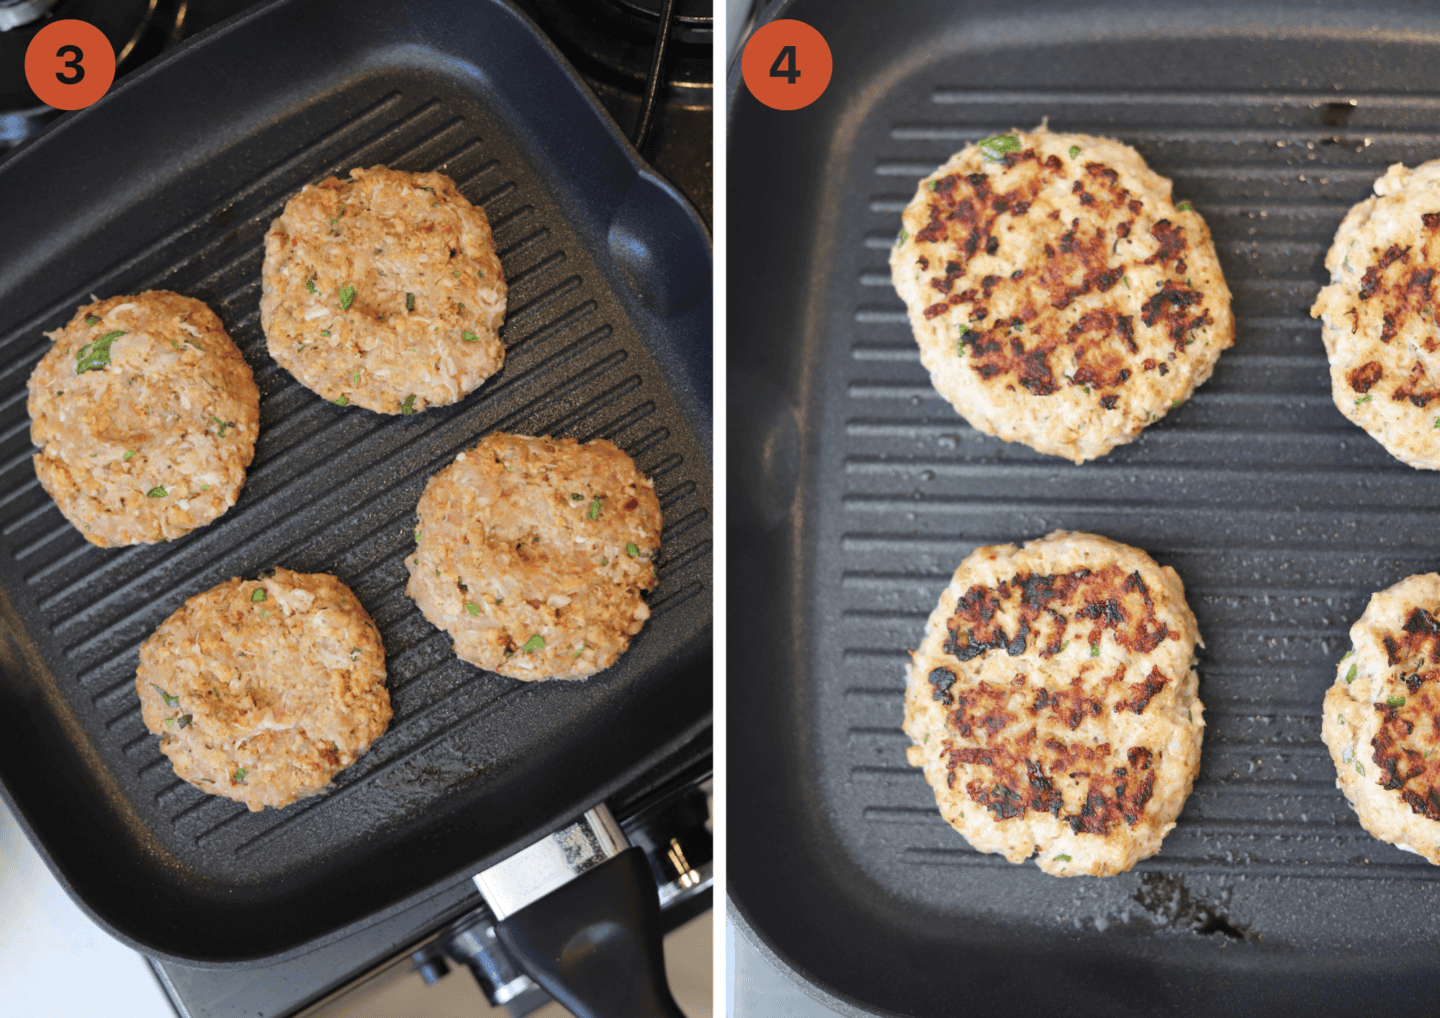 The ground chicken burger patties being cooked in a griddle pan.